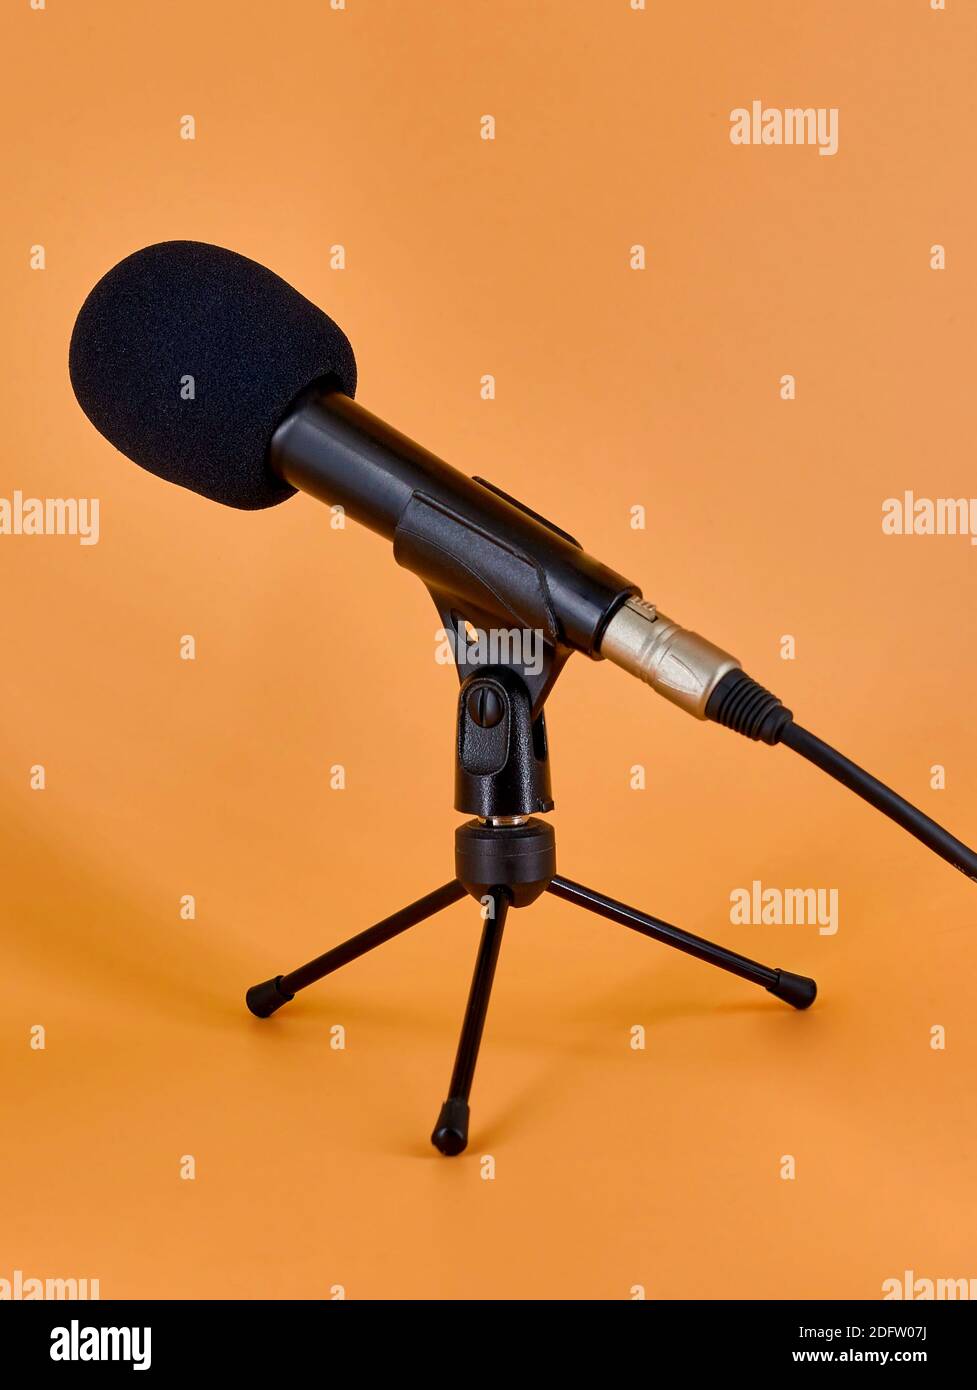 Dinamic microphone on a tripod table stand with protective sponge. Stock Photo